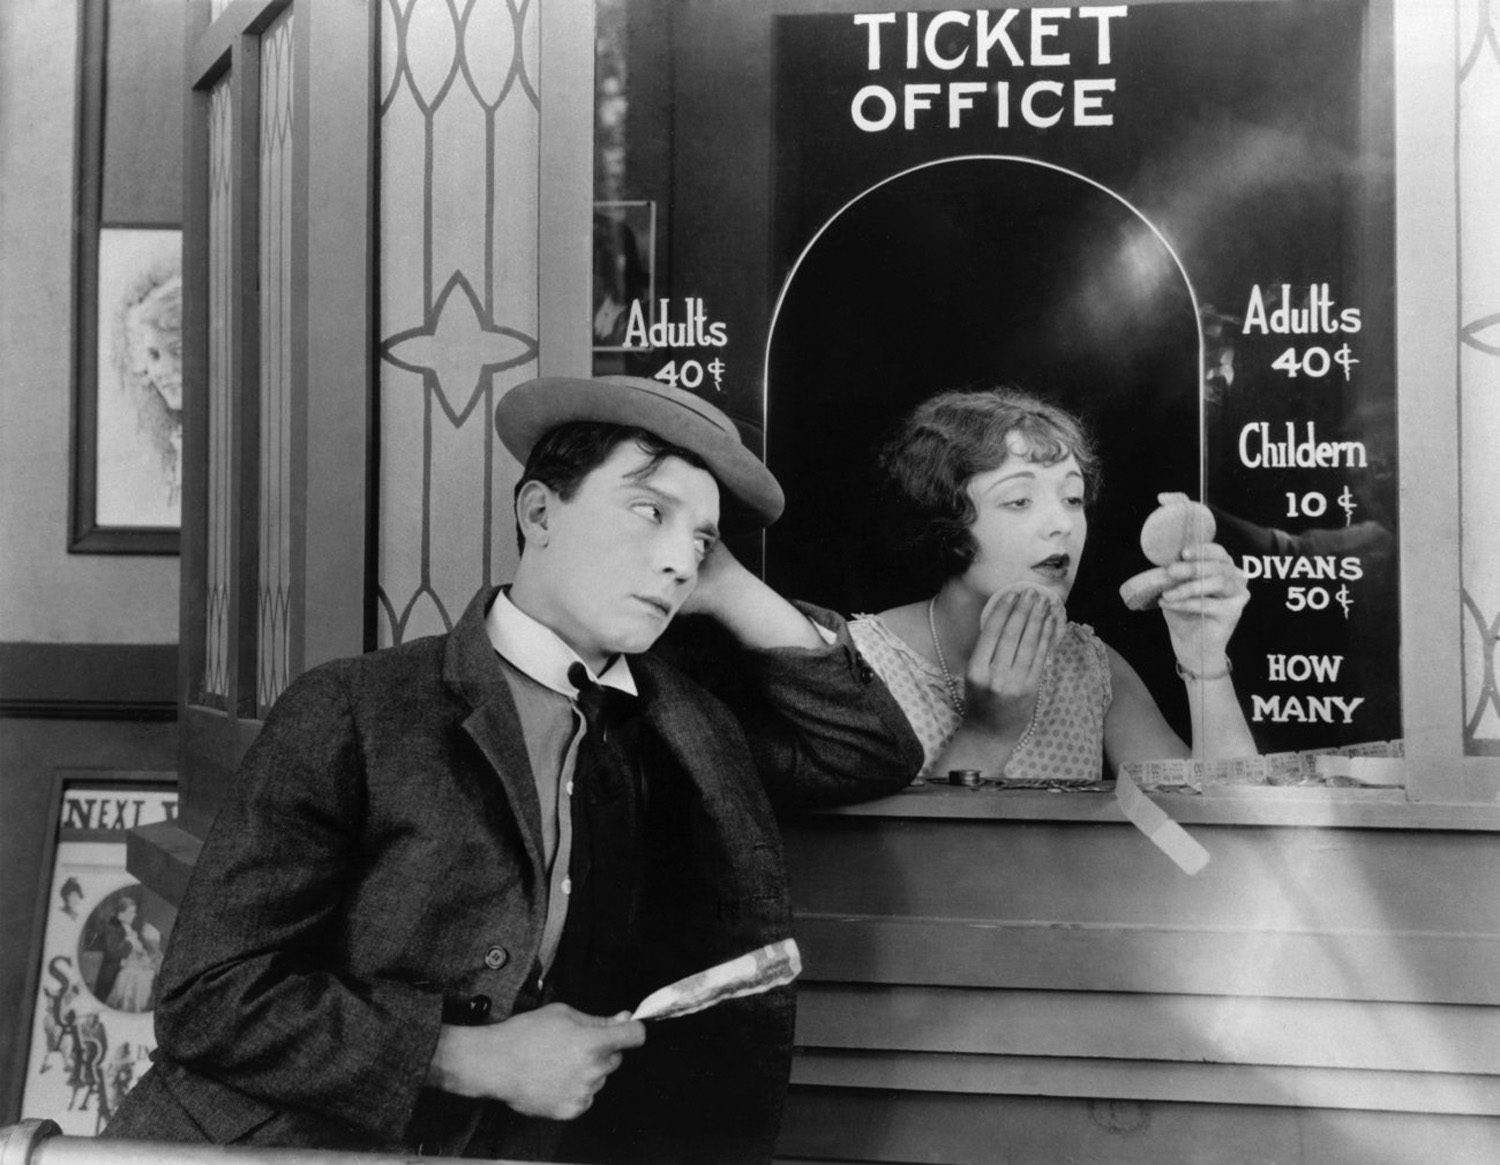 CABINET / Buster Keaton's Cure